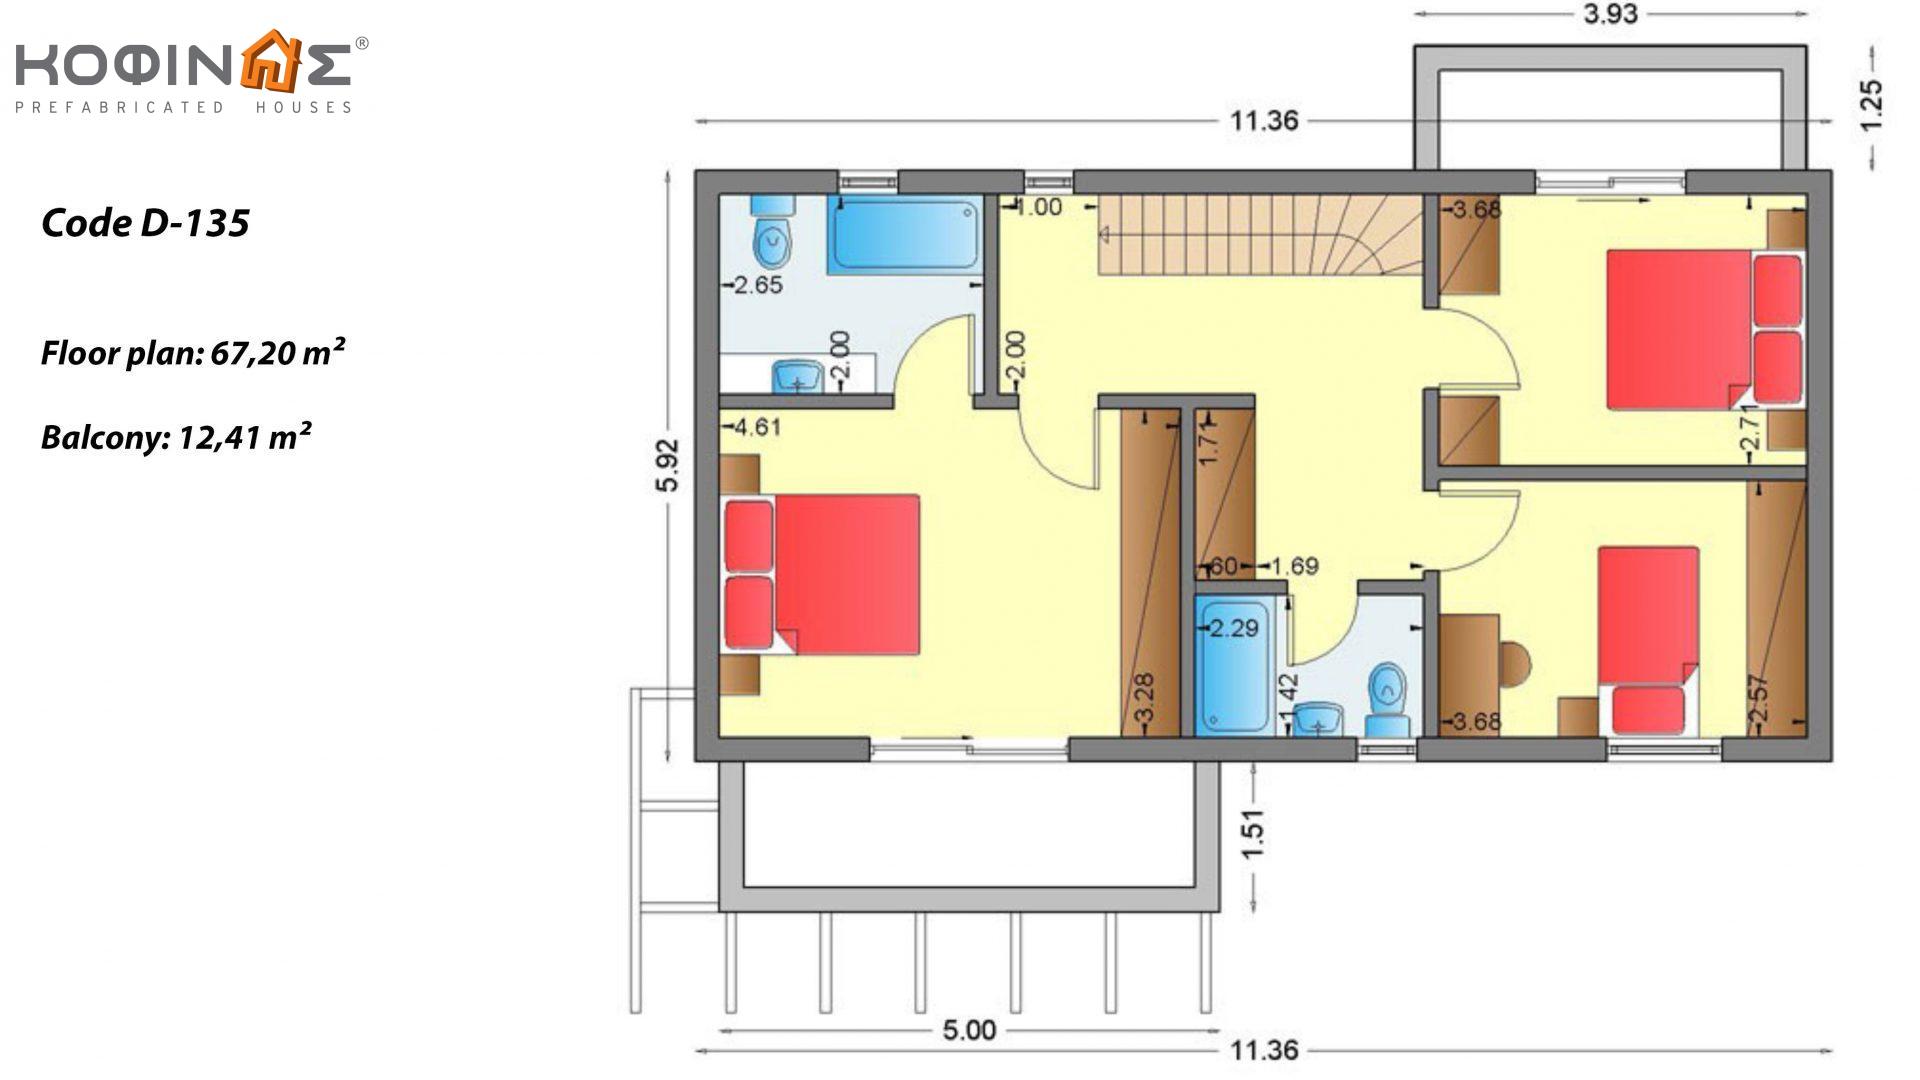 2-story house D-135, total surface of 135,20 m²,covered roofed areas 17.60 m²,balconies 12.41 m²